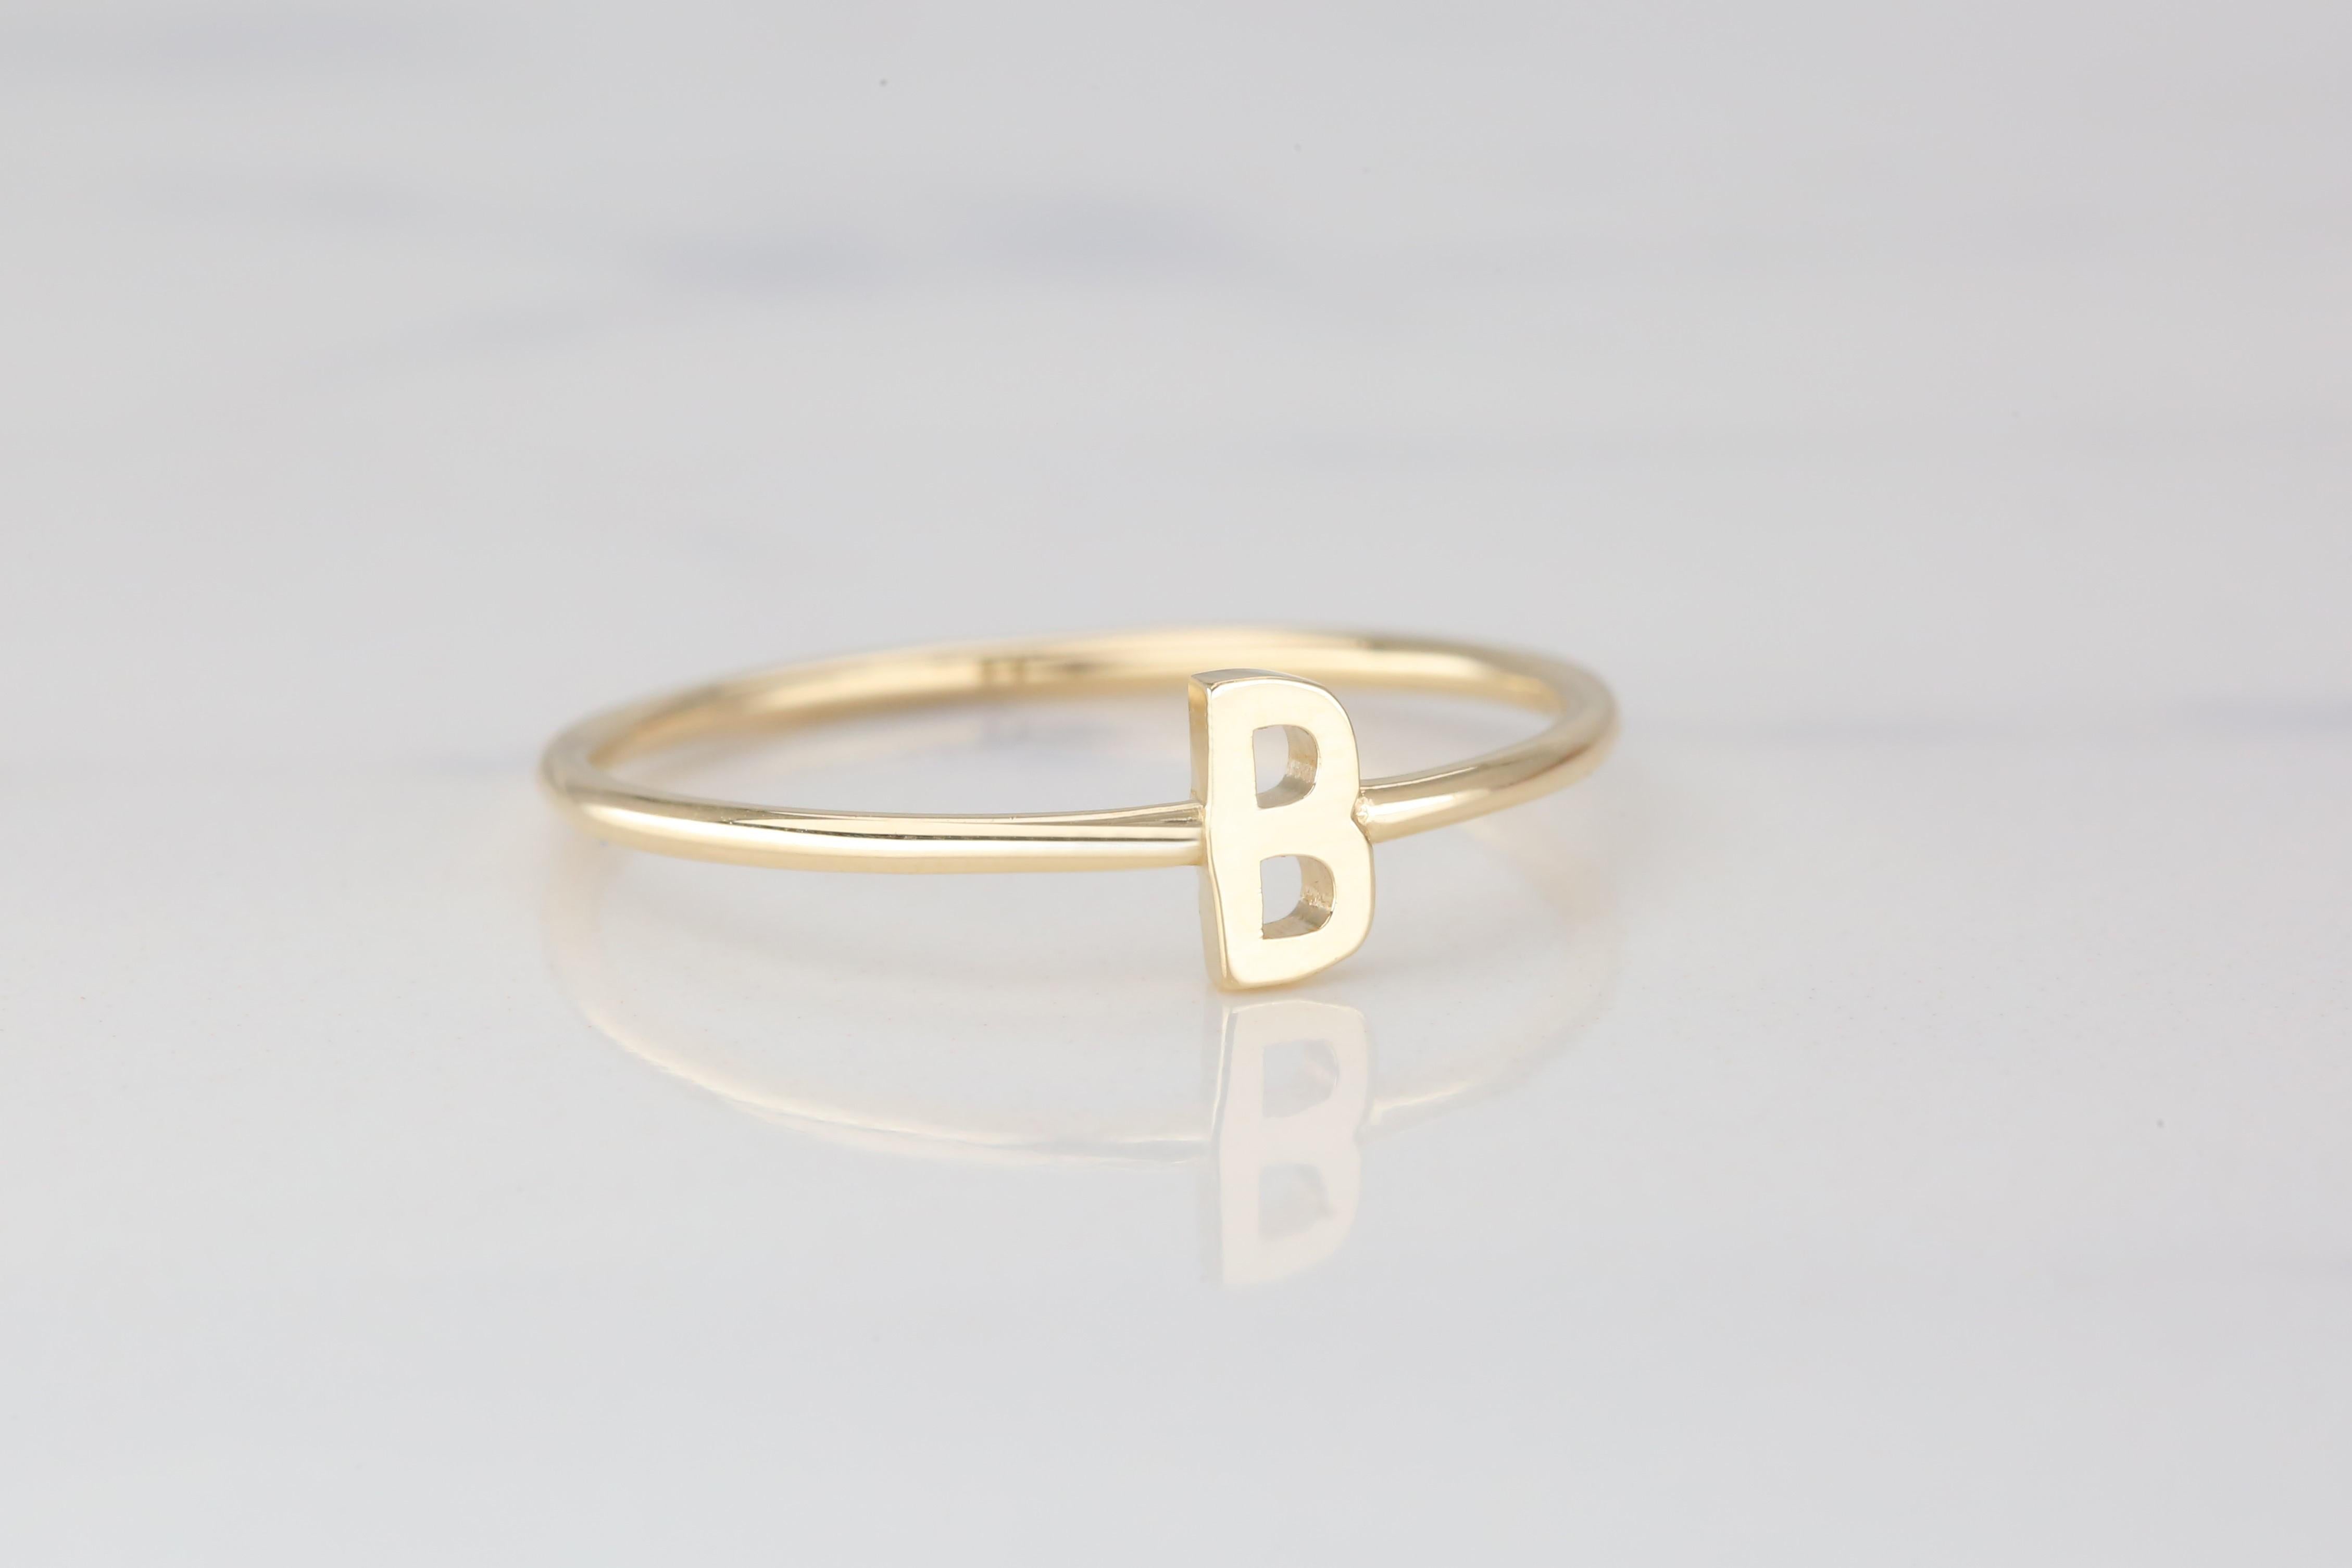 For Sale:  14K Gold Initial B Letter Ring, Personalized Initial Letter Ring 5